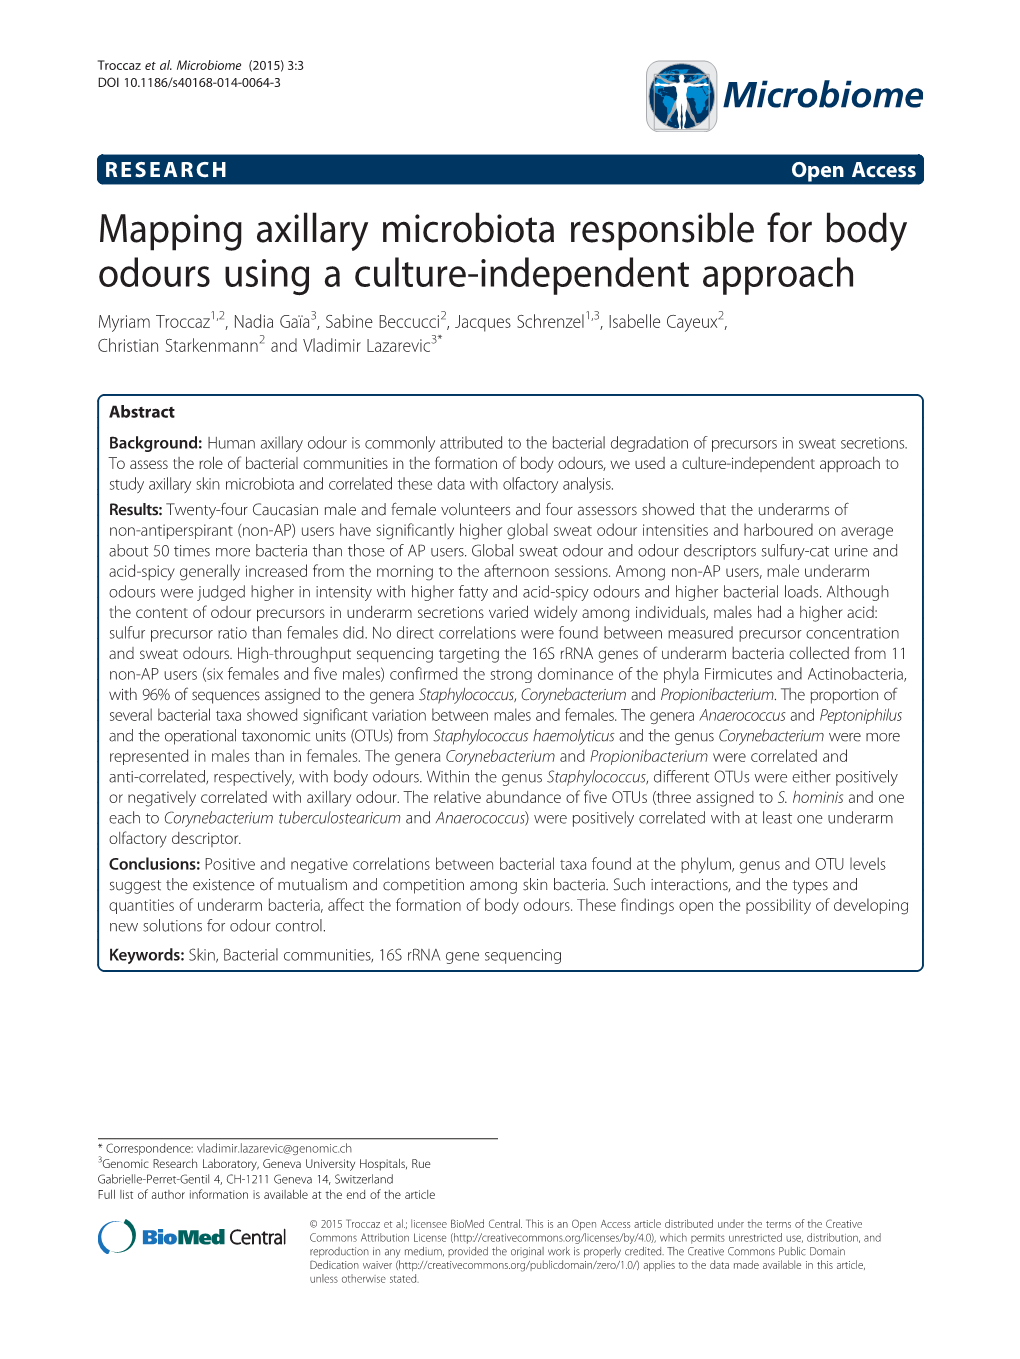 Mapping Axillary Microbiota Responsible for Body Odours Using A